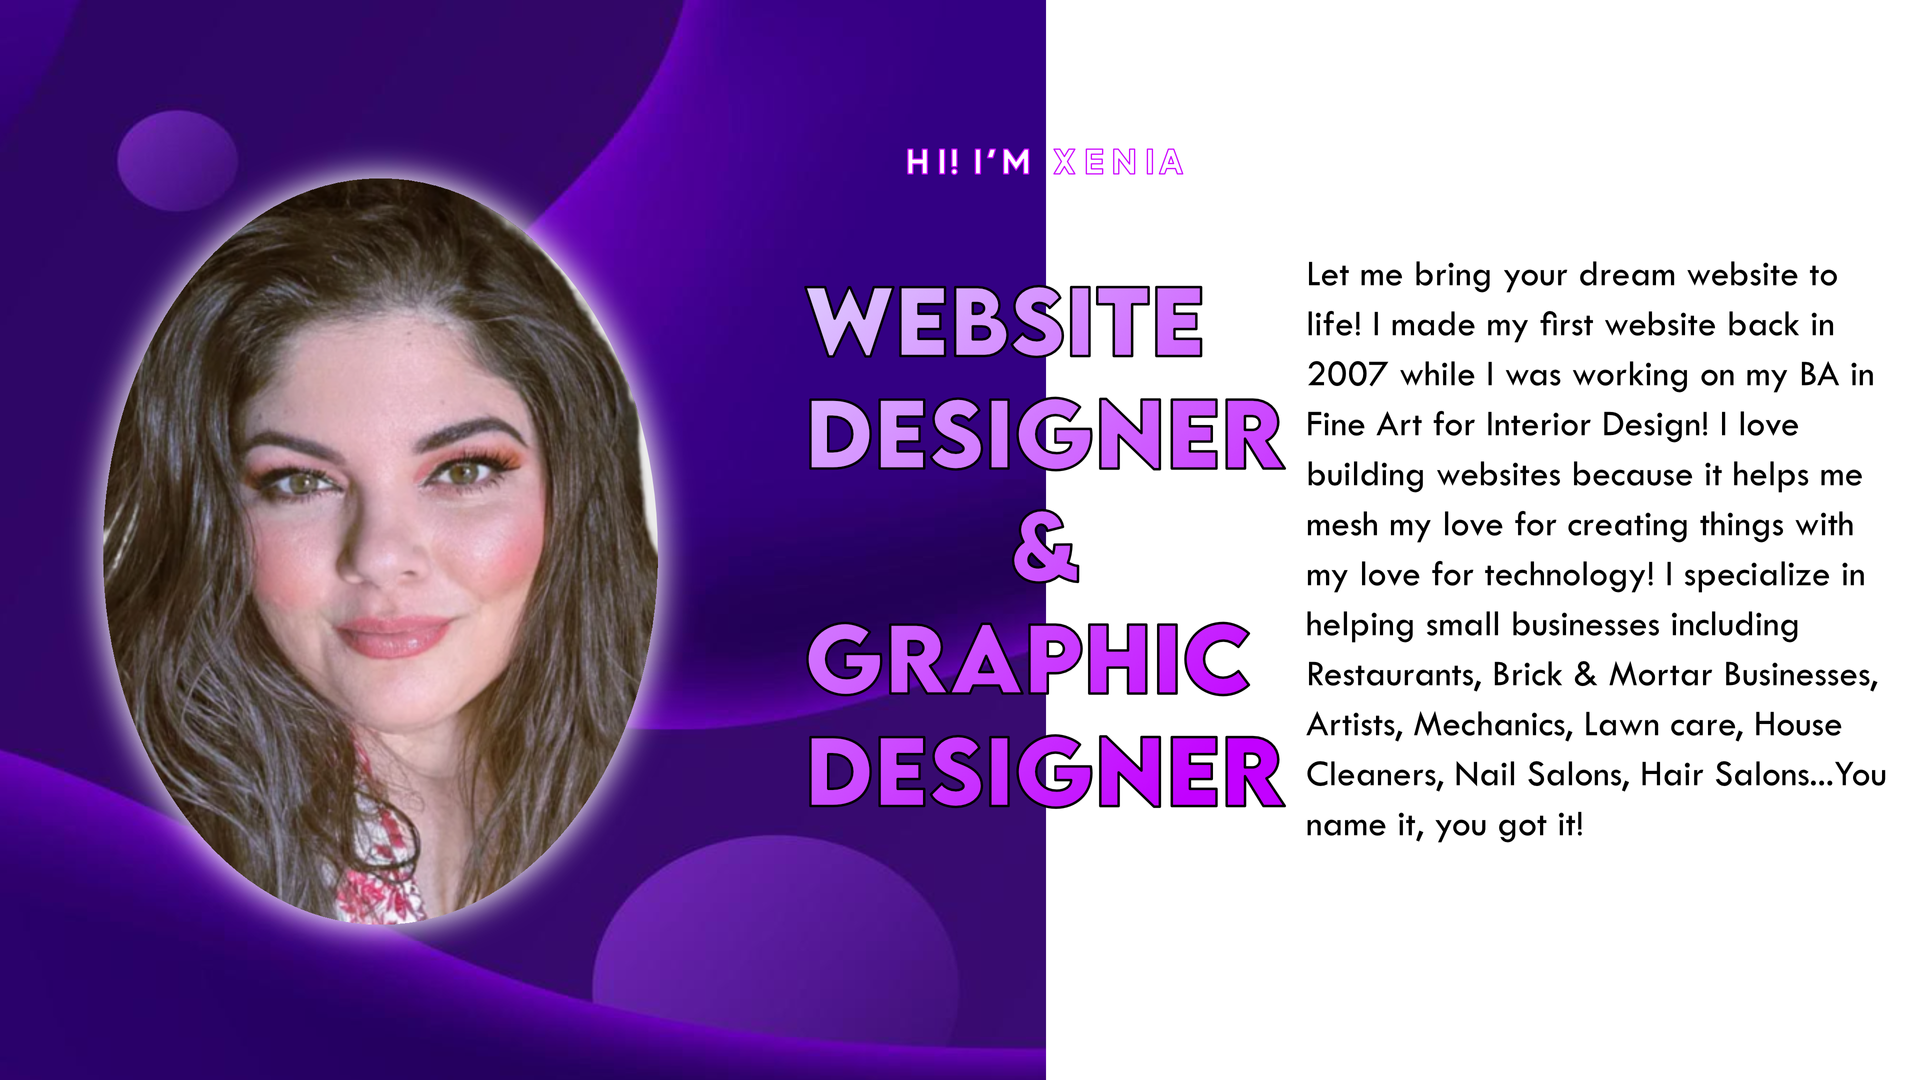 A photo of XenBunny and text that says website designer and graphic designer.